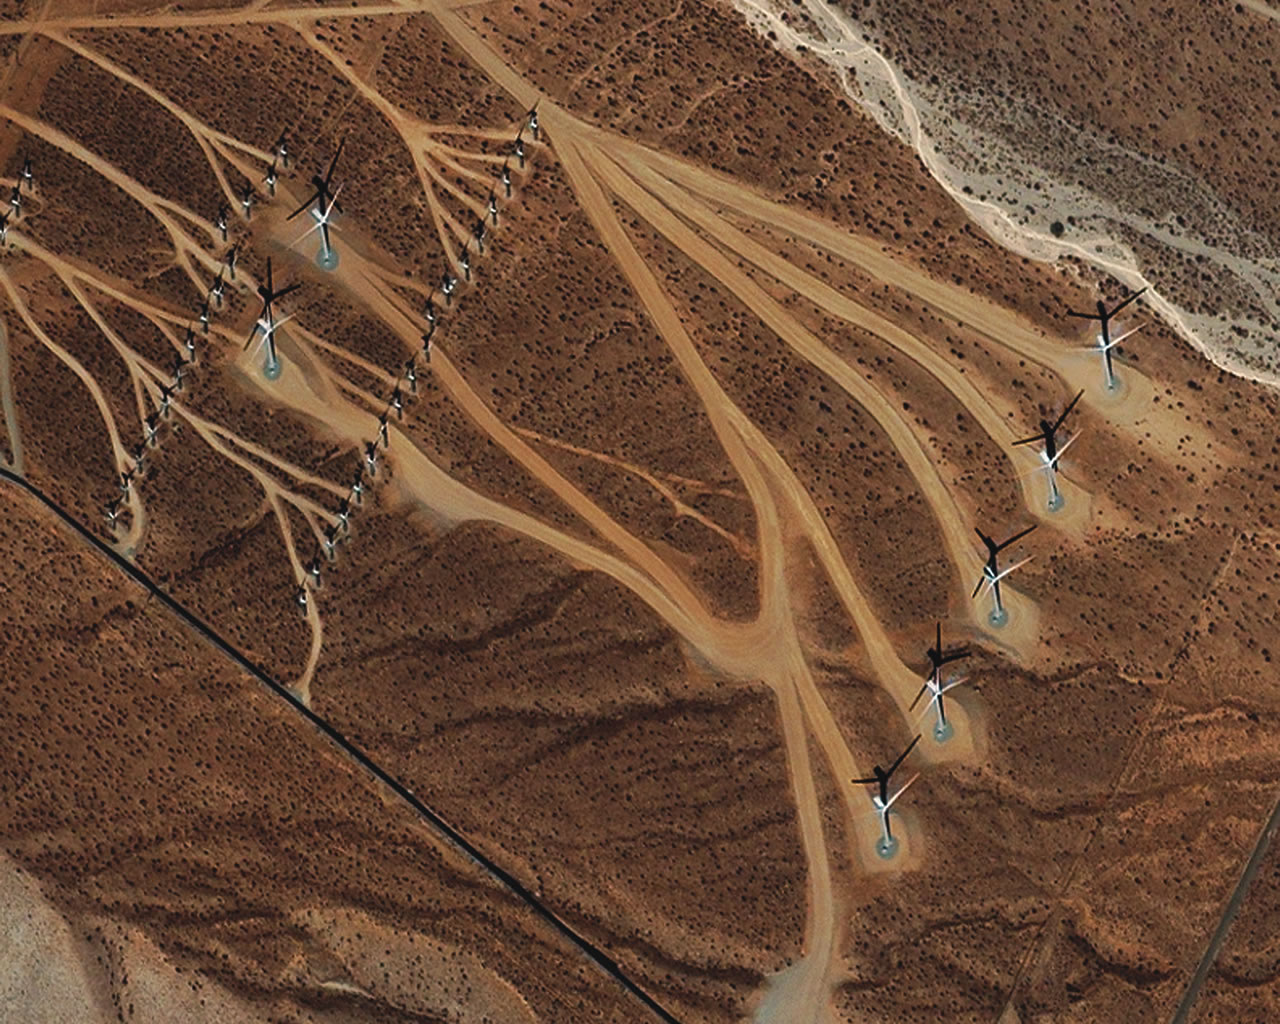 Wind turbines near San Gorgonio Pass in California.  The pass creates a wind tunnel making it very suitable for wind power generation.  Image captured by the Ikonos satellite in 2003.  Retrieved from: http://earthobservatory.nasa.gov/IOTD/view.php?id=5656, last accessed 5/3/16.